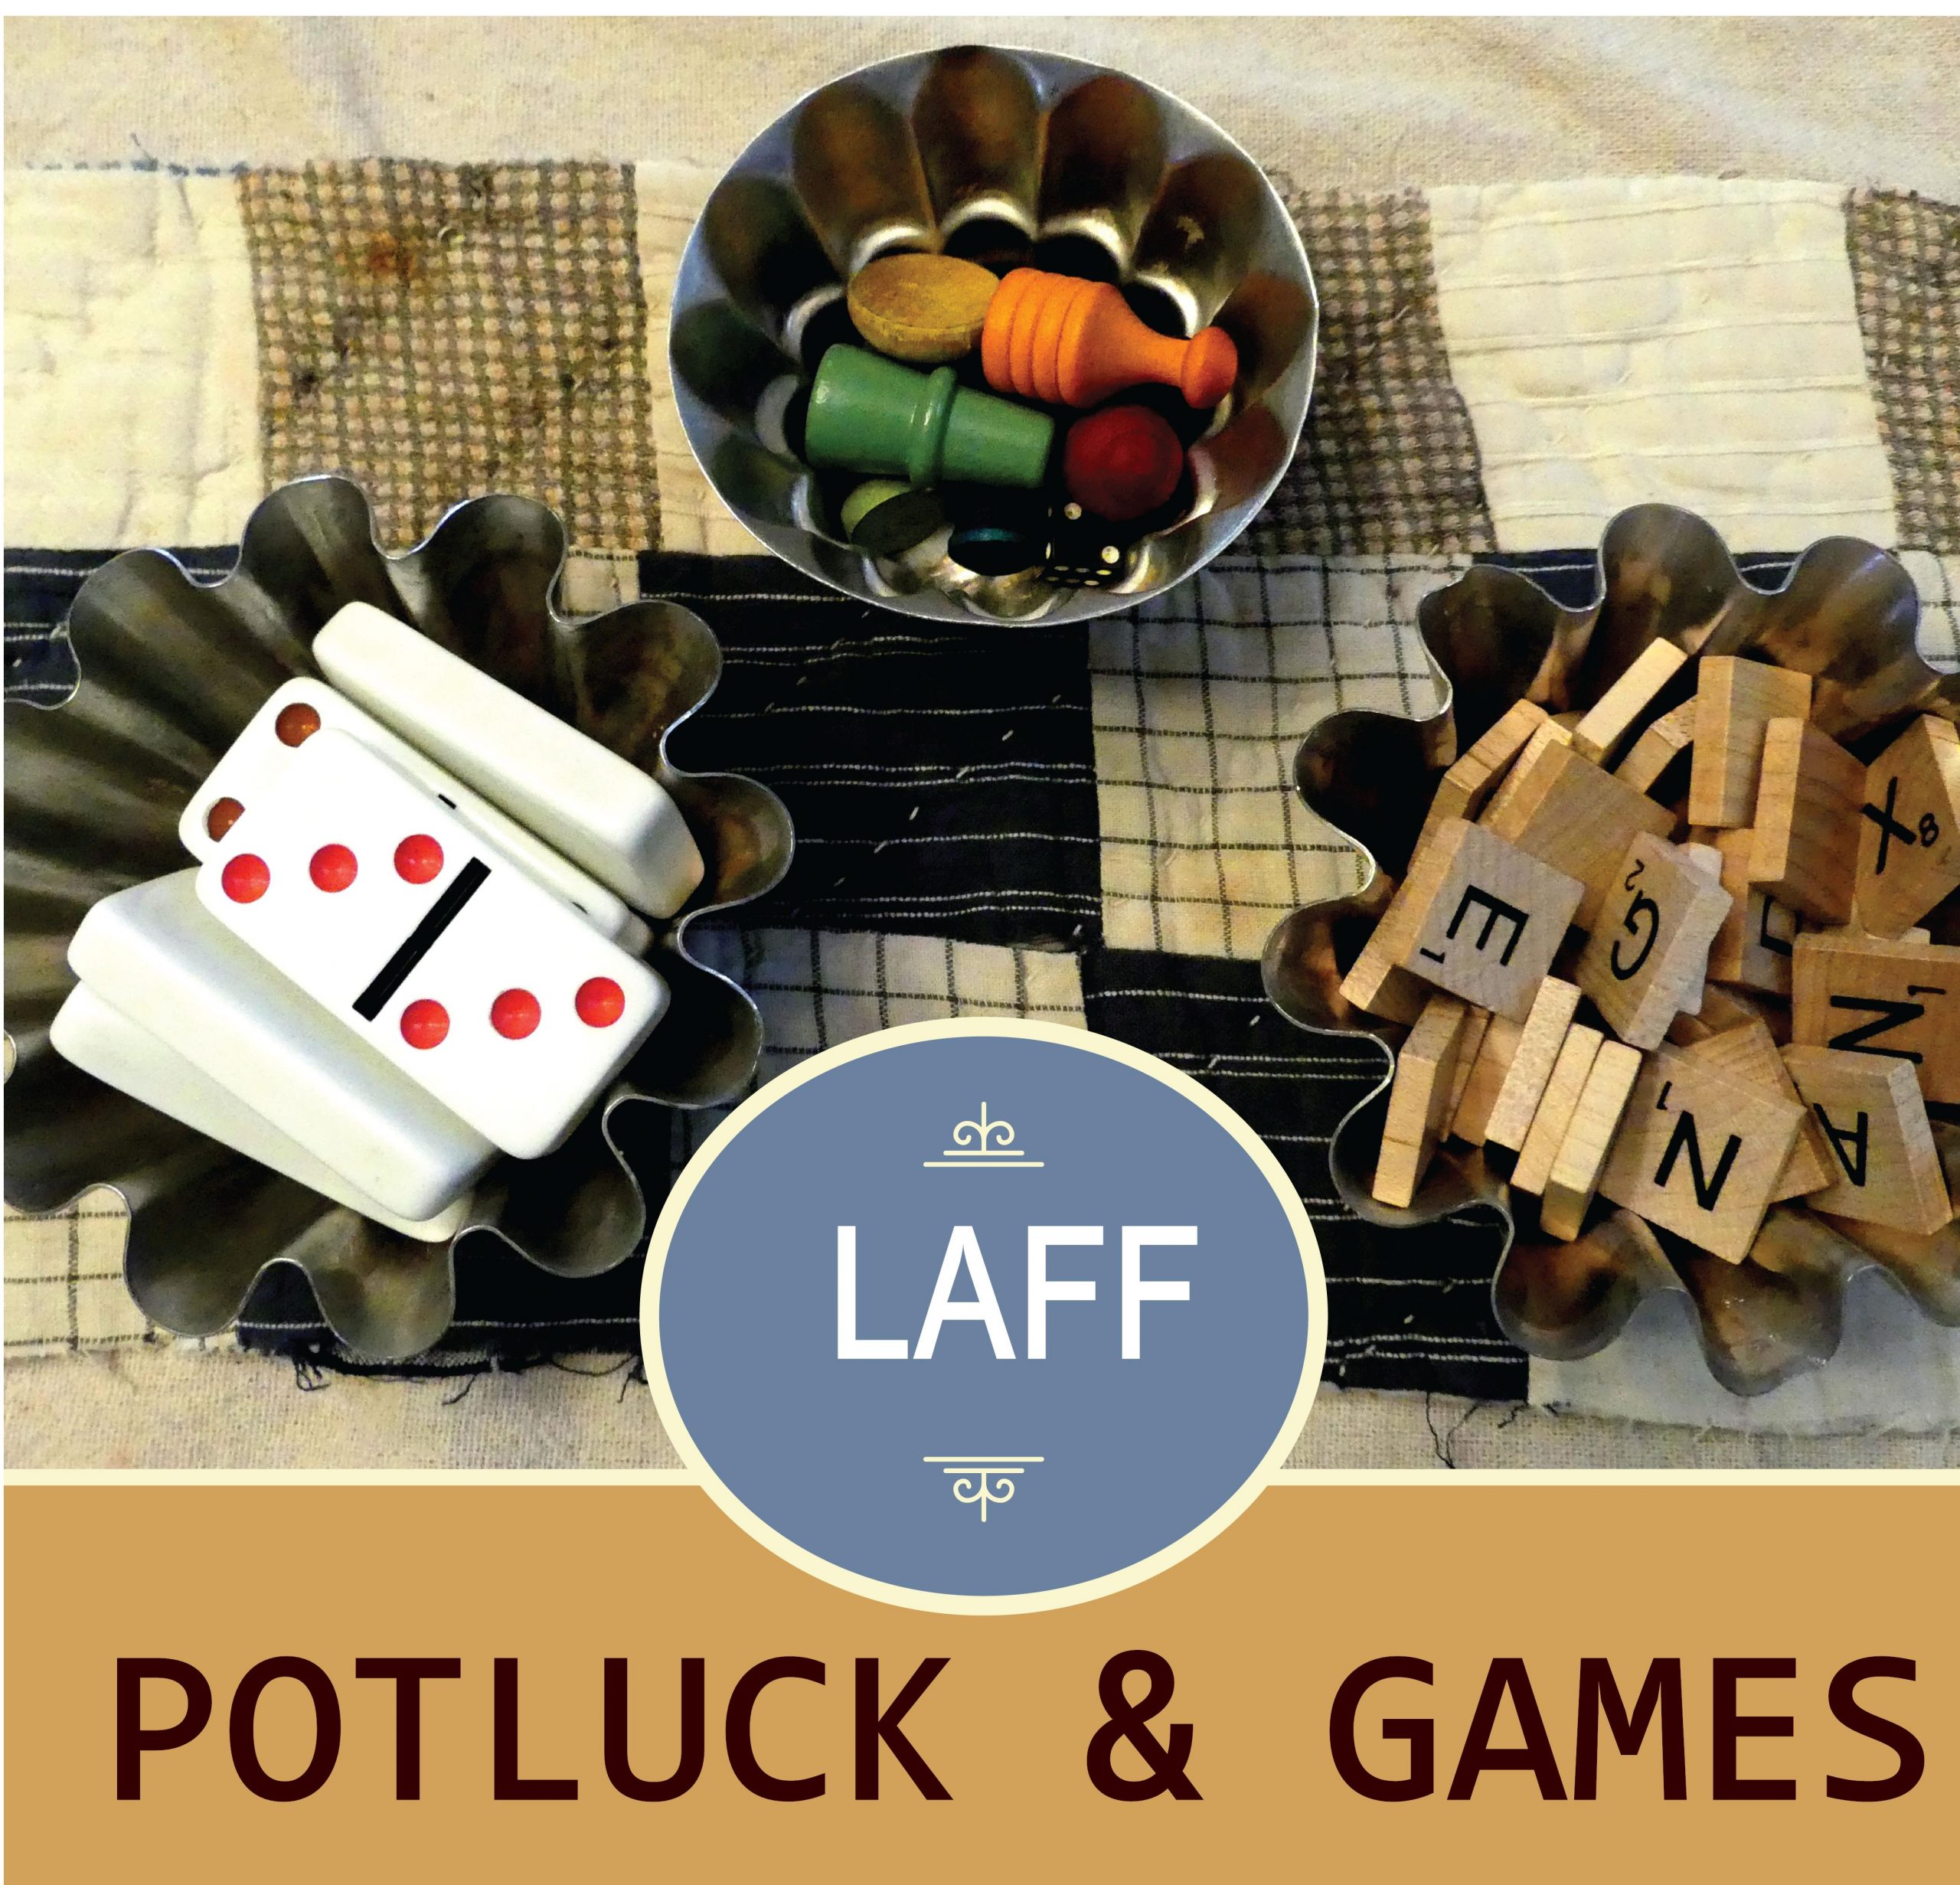 LAFF potluck and games